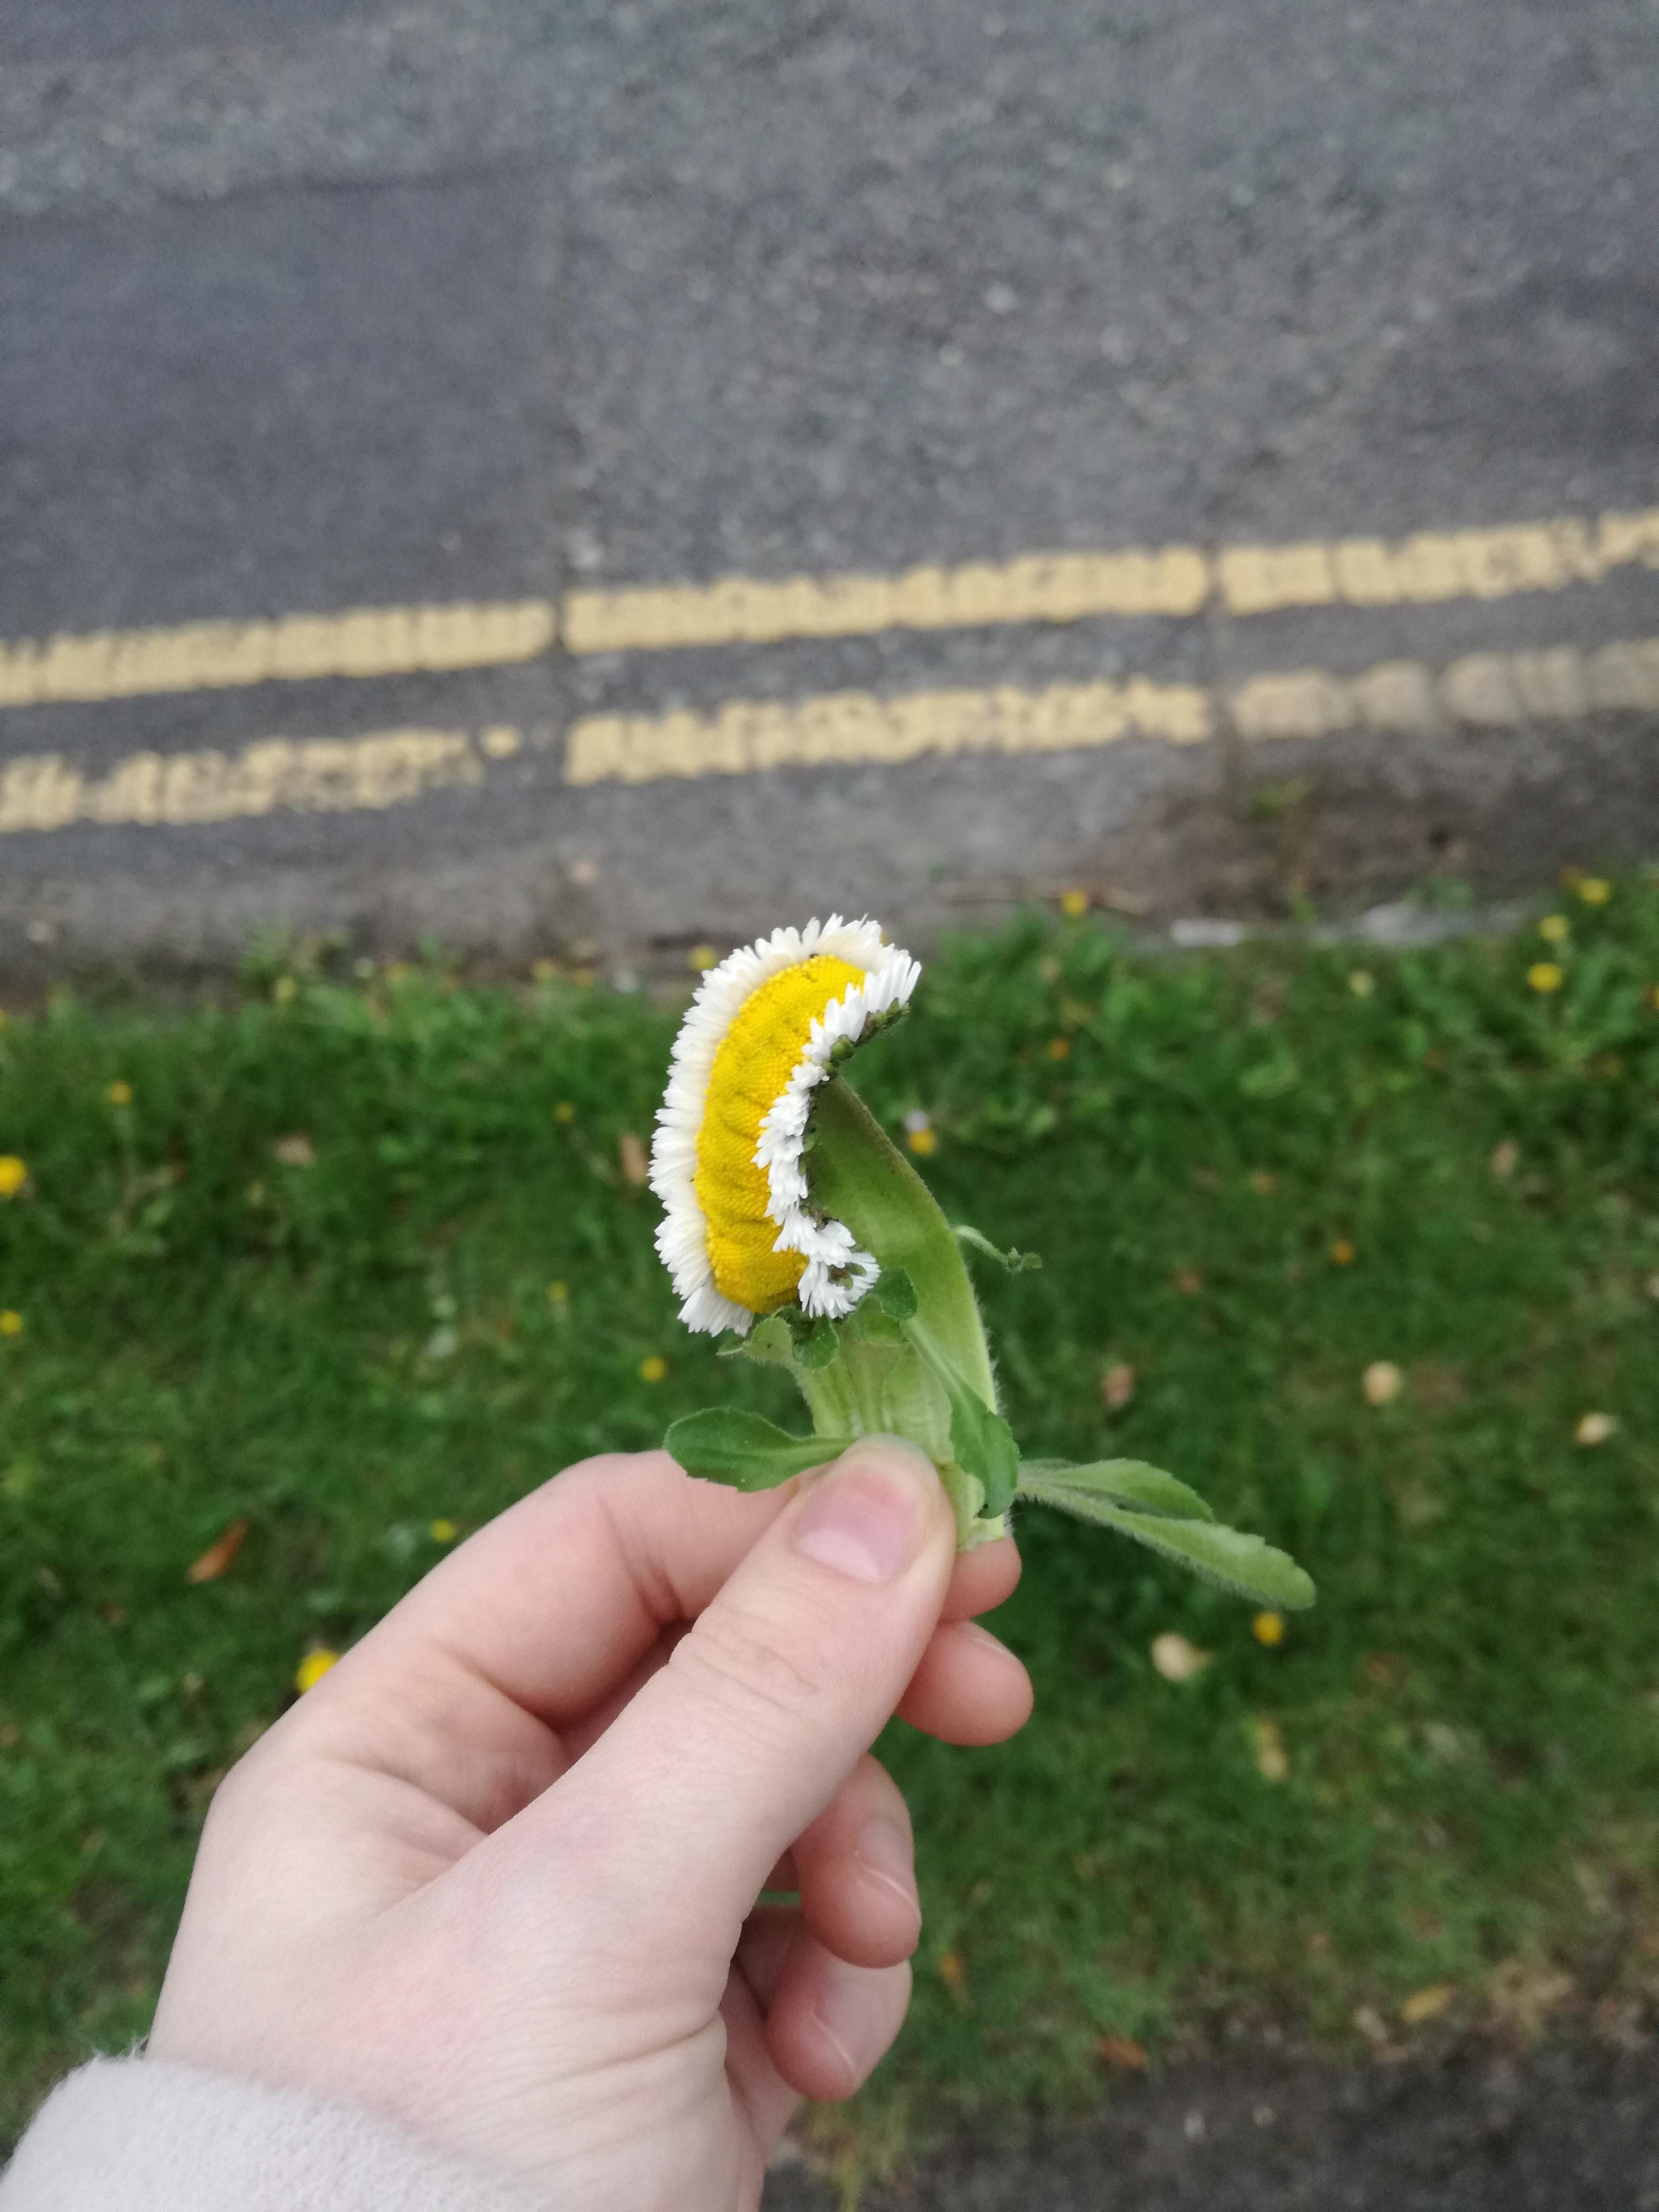 This daisy plucked from the outskirts of Chernobyl, probably.